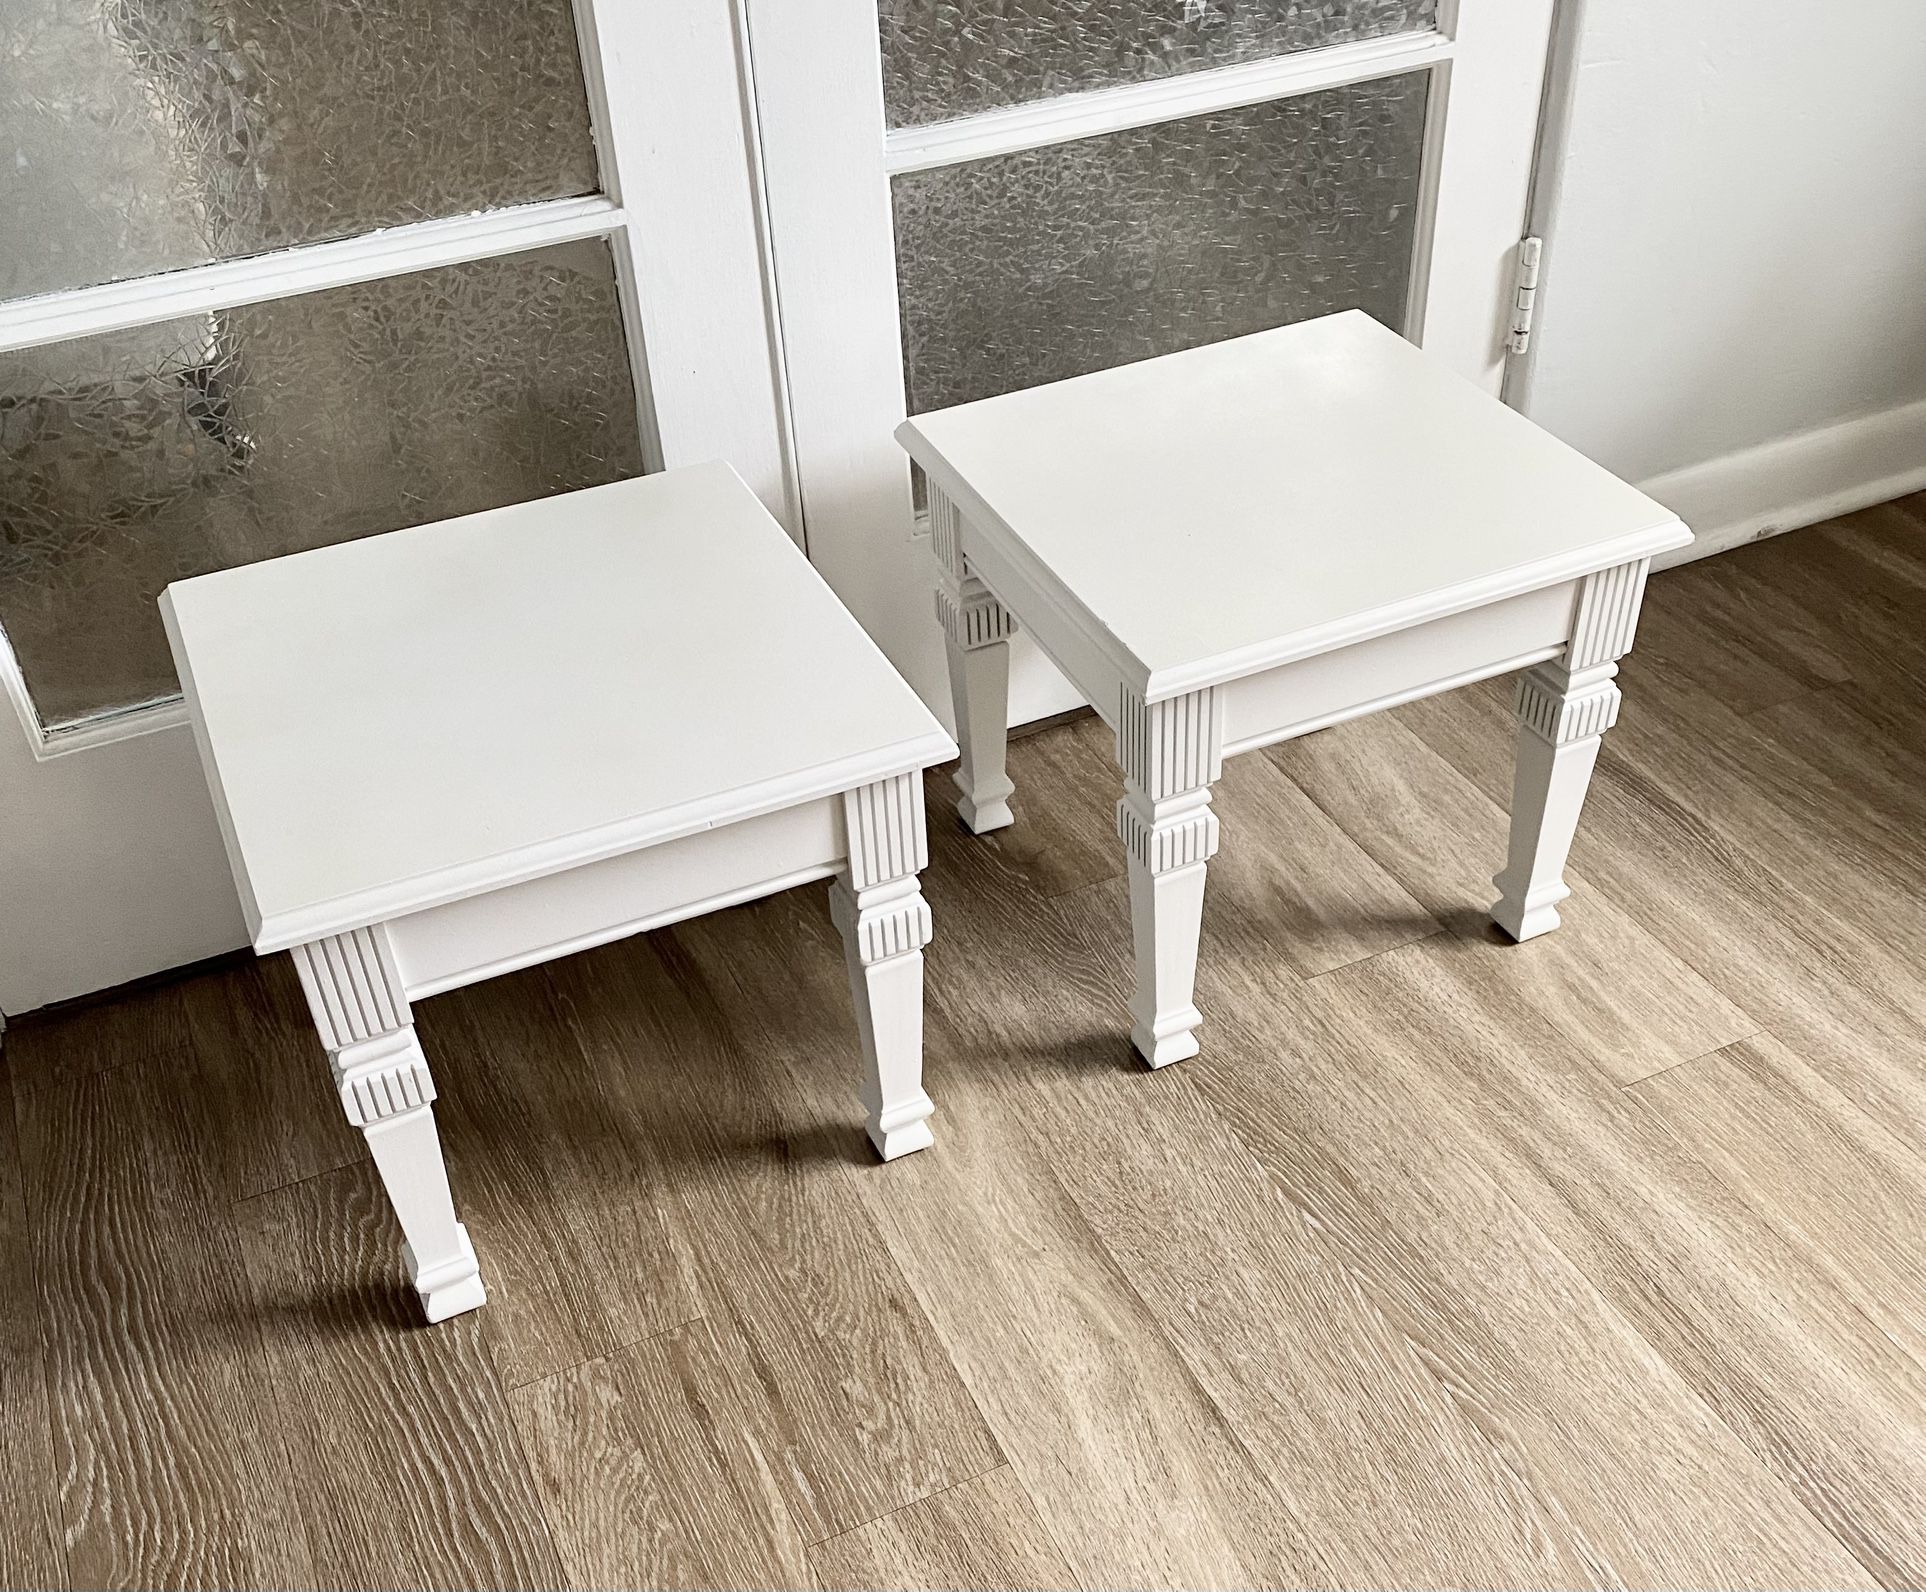 SMALL WHITE END TABLES